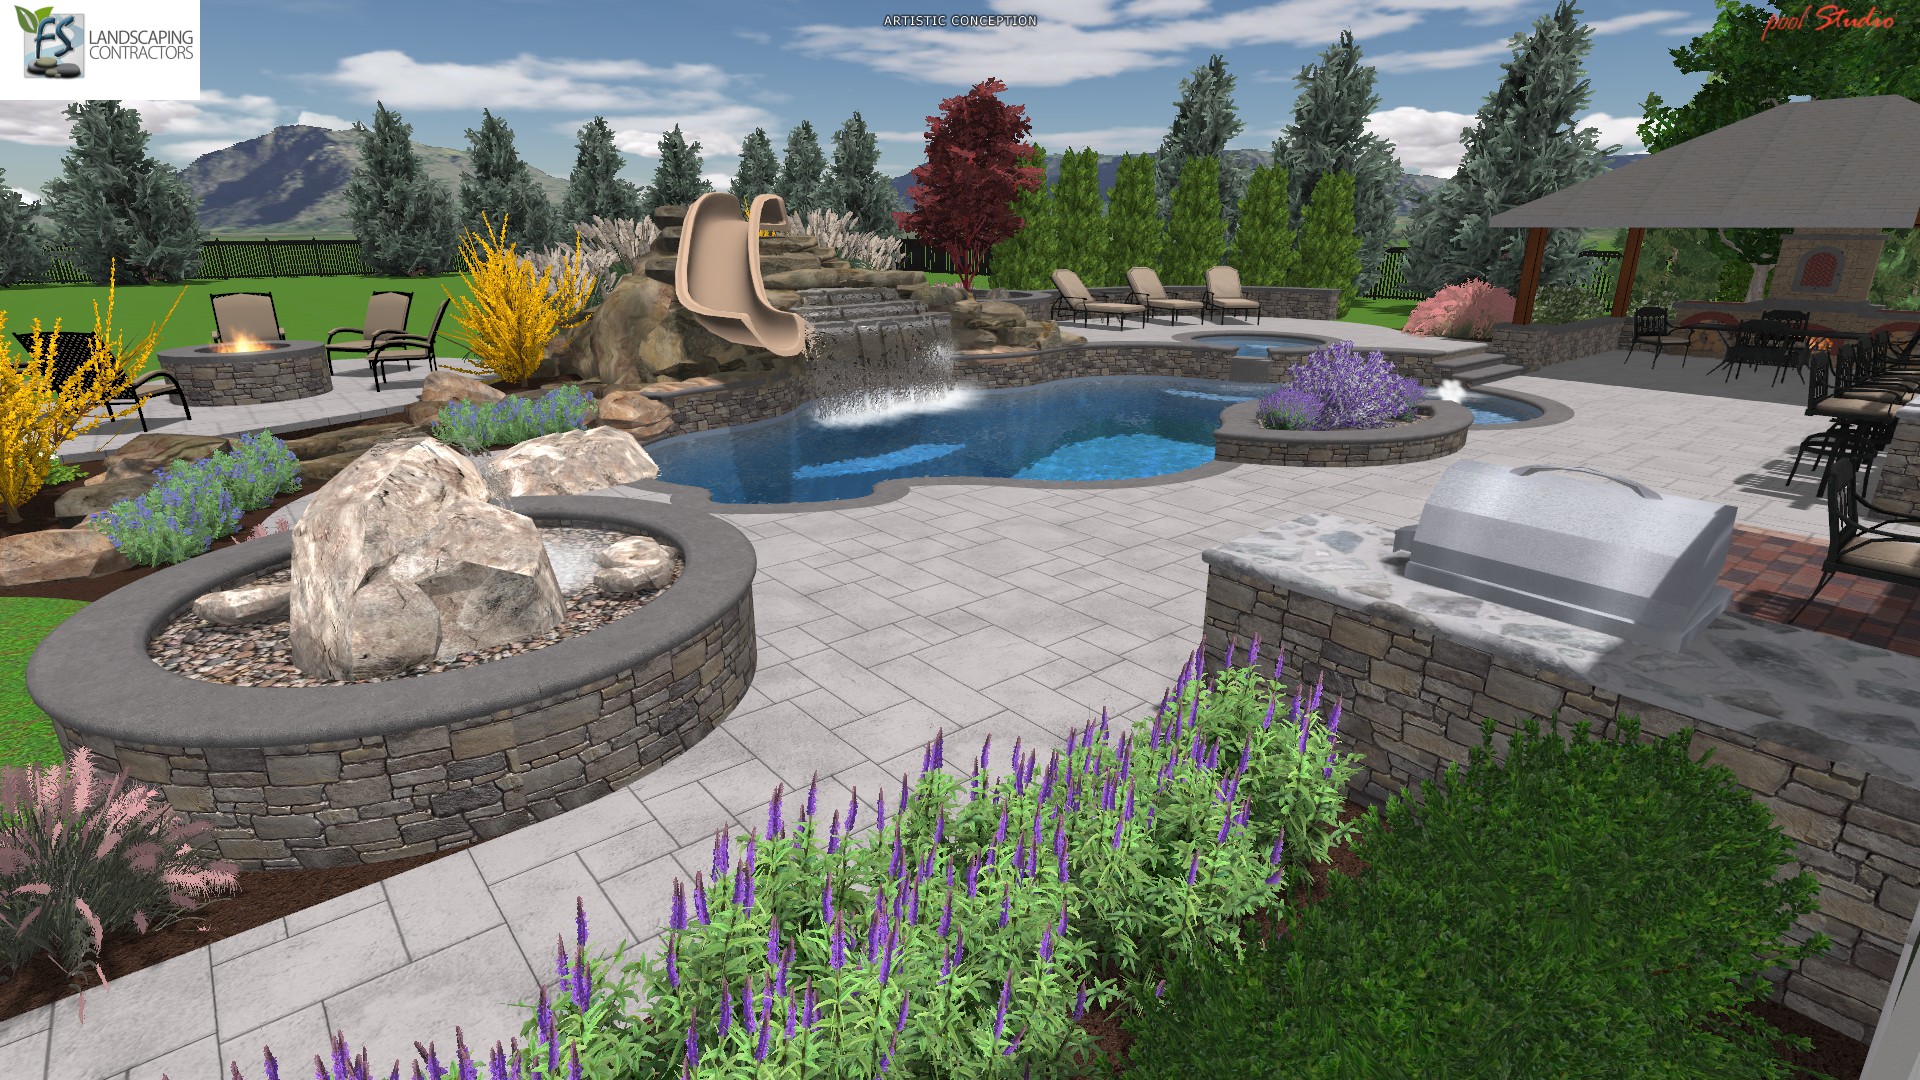 Swimming Pool Designers, Pool And Landscaping Companies